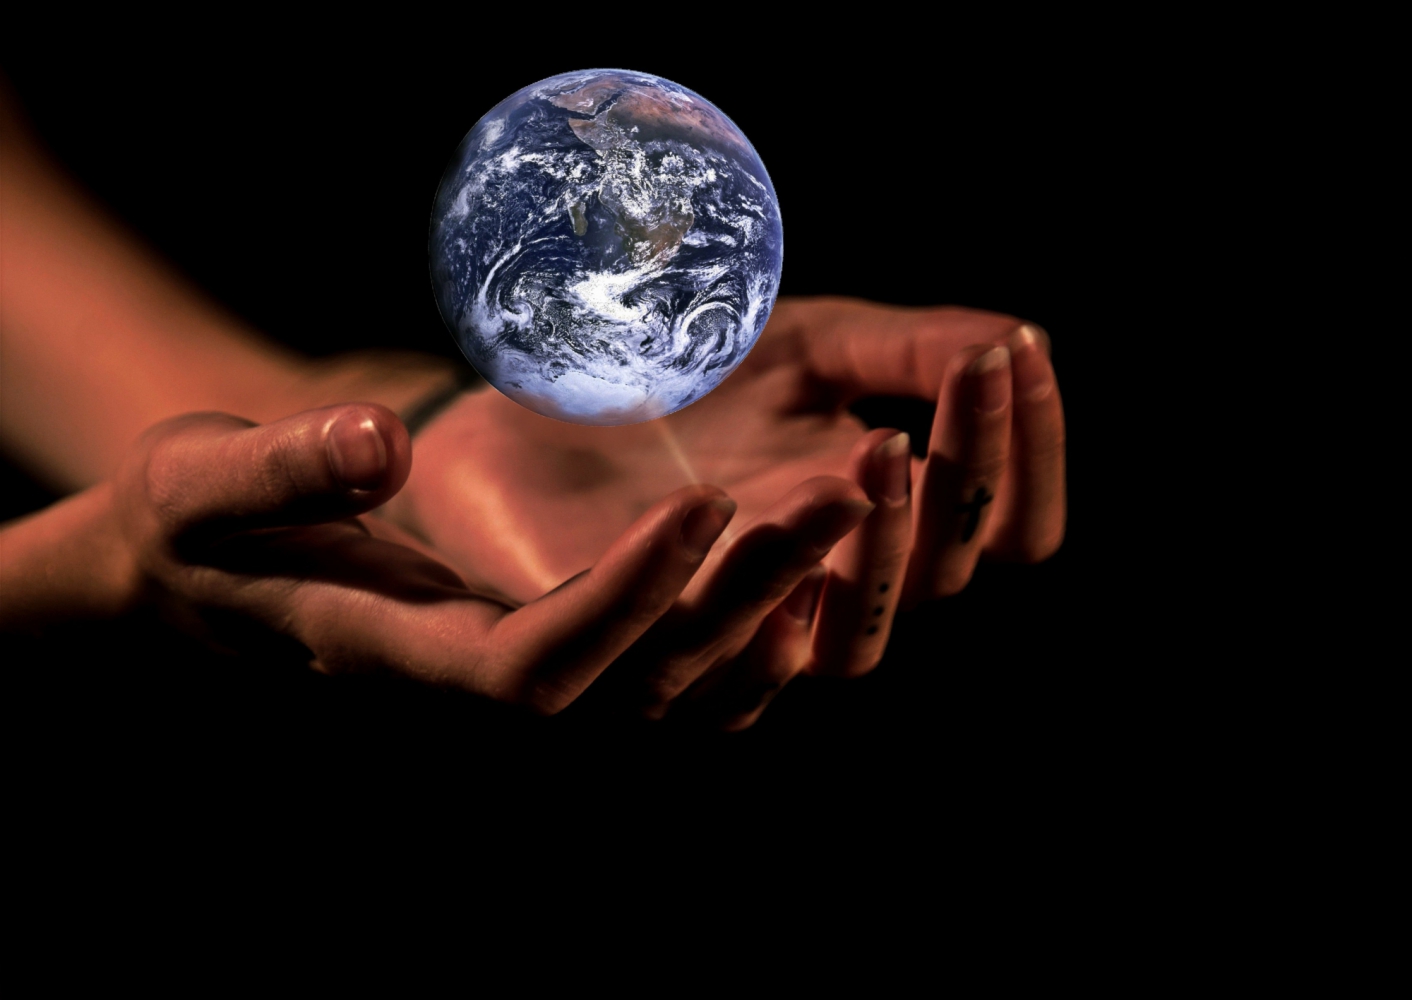 The world is in your hands